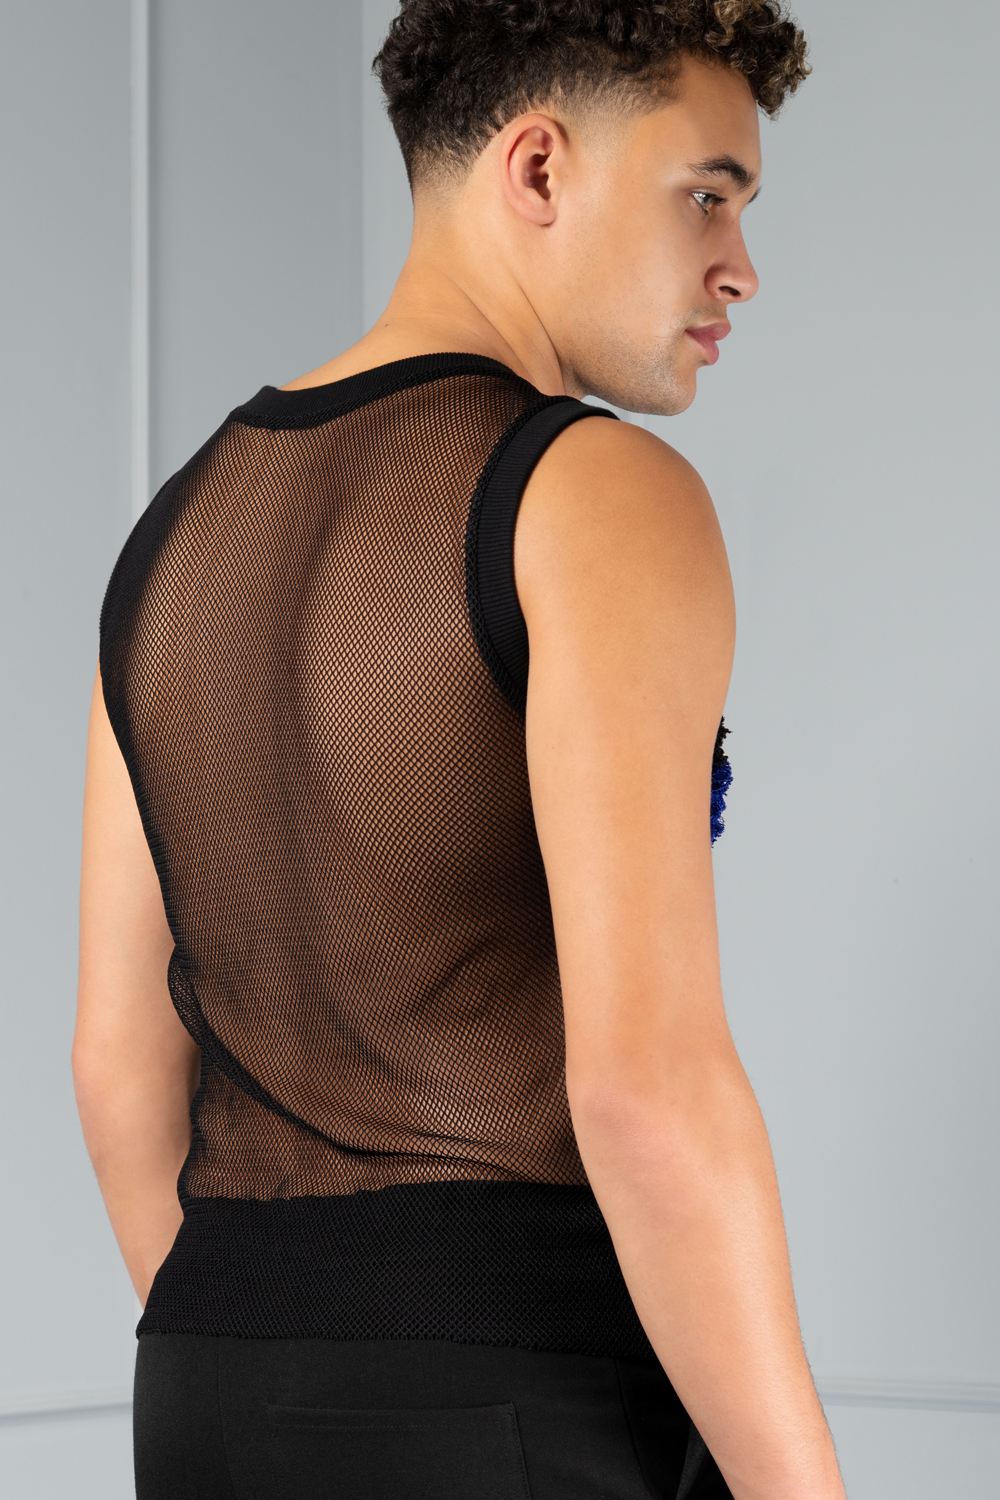 A mesh men's top with lace-flowers | Haruco-vert